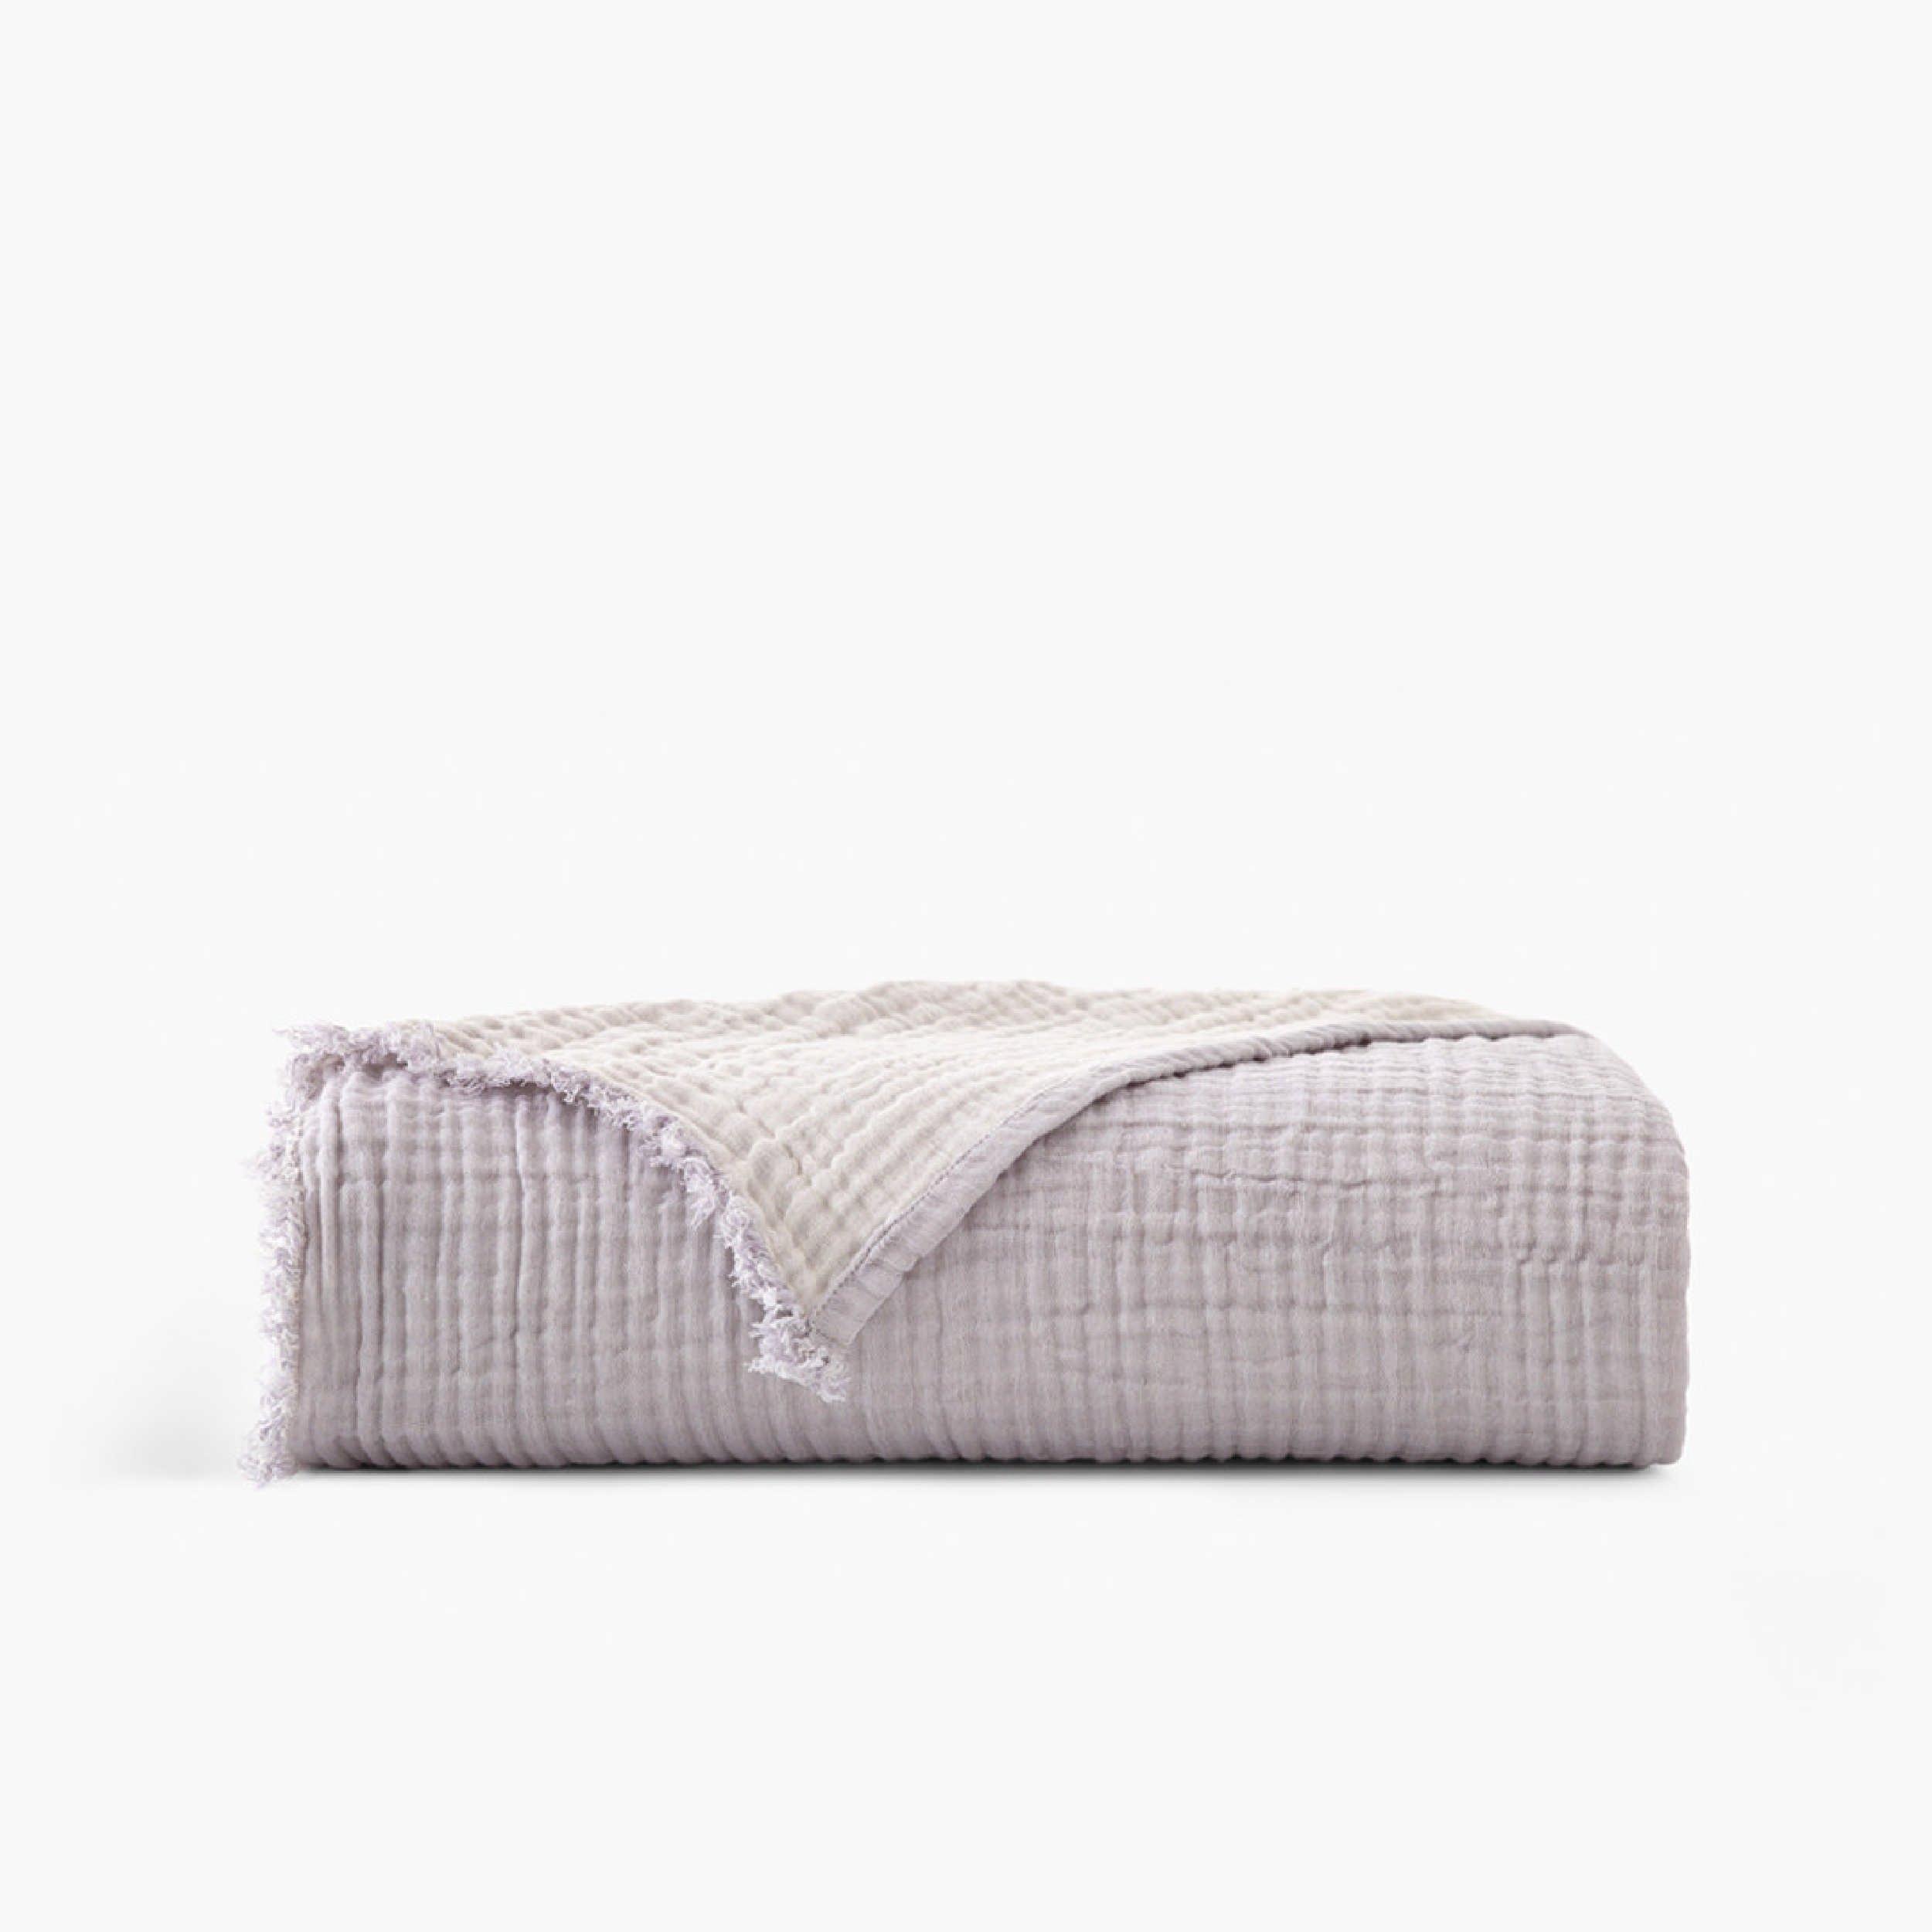 Truly Soft Two-Toned Organic Throw Blanket.